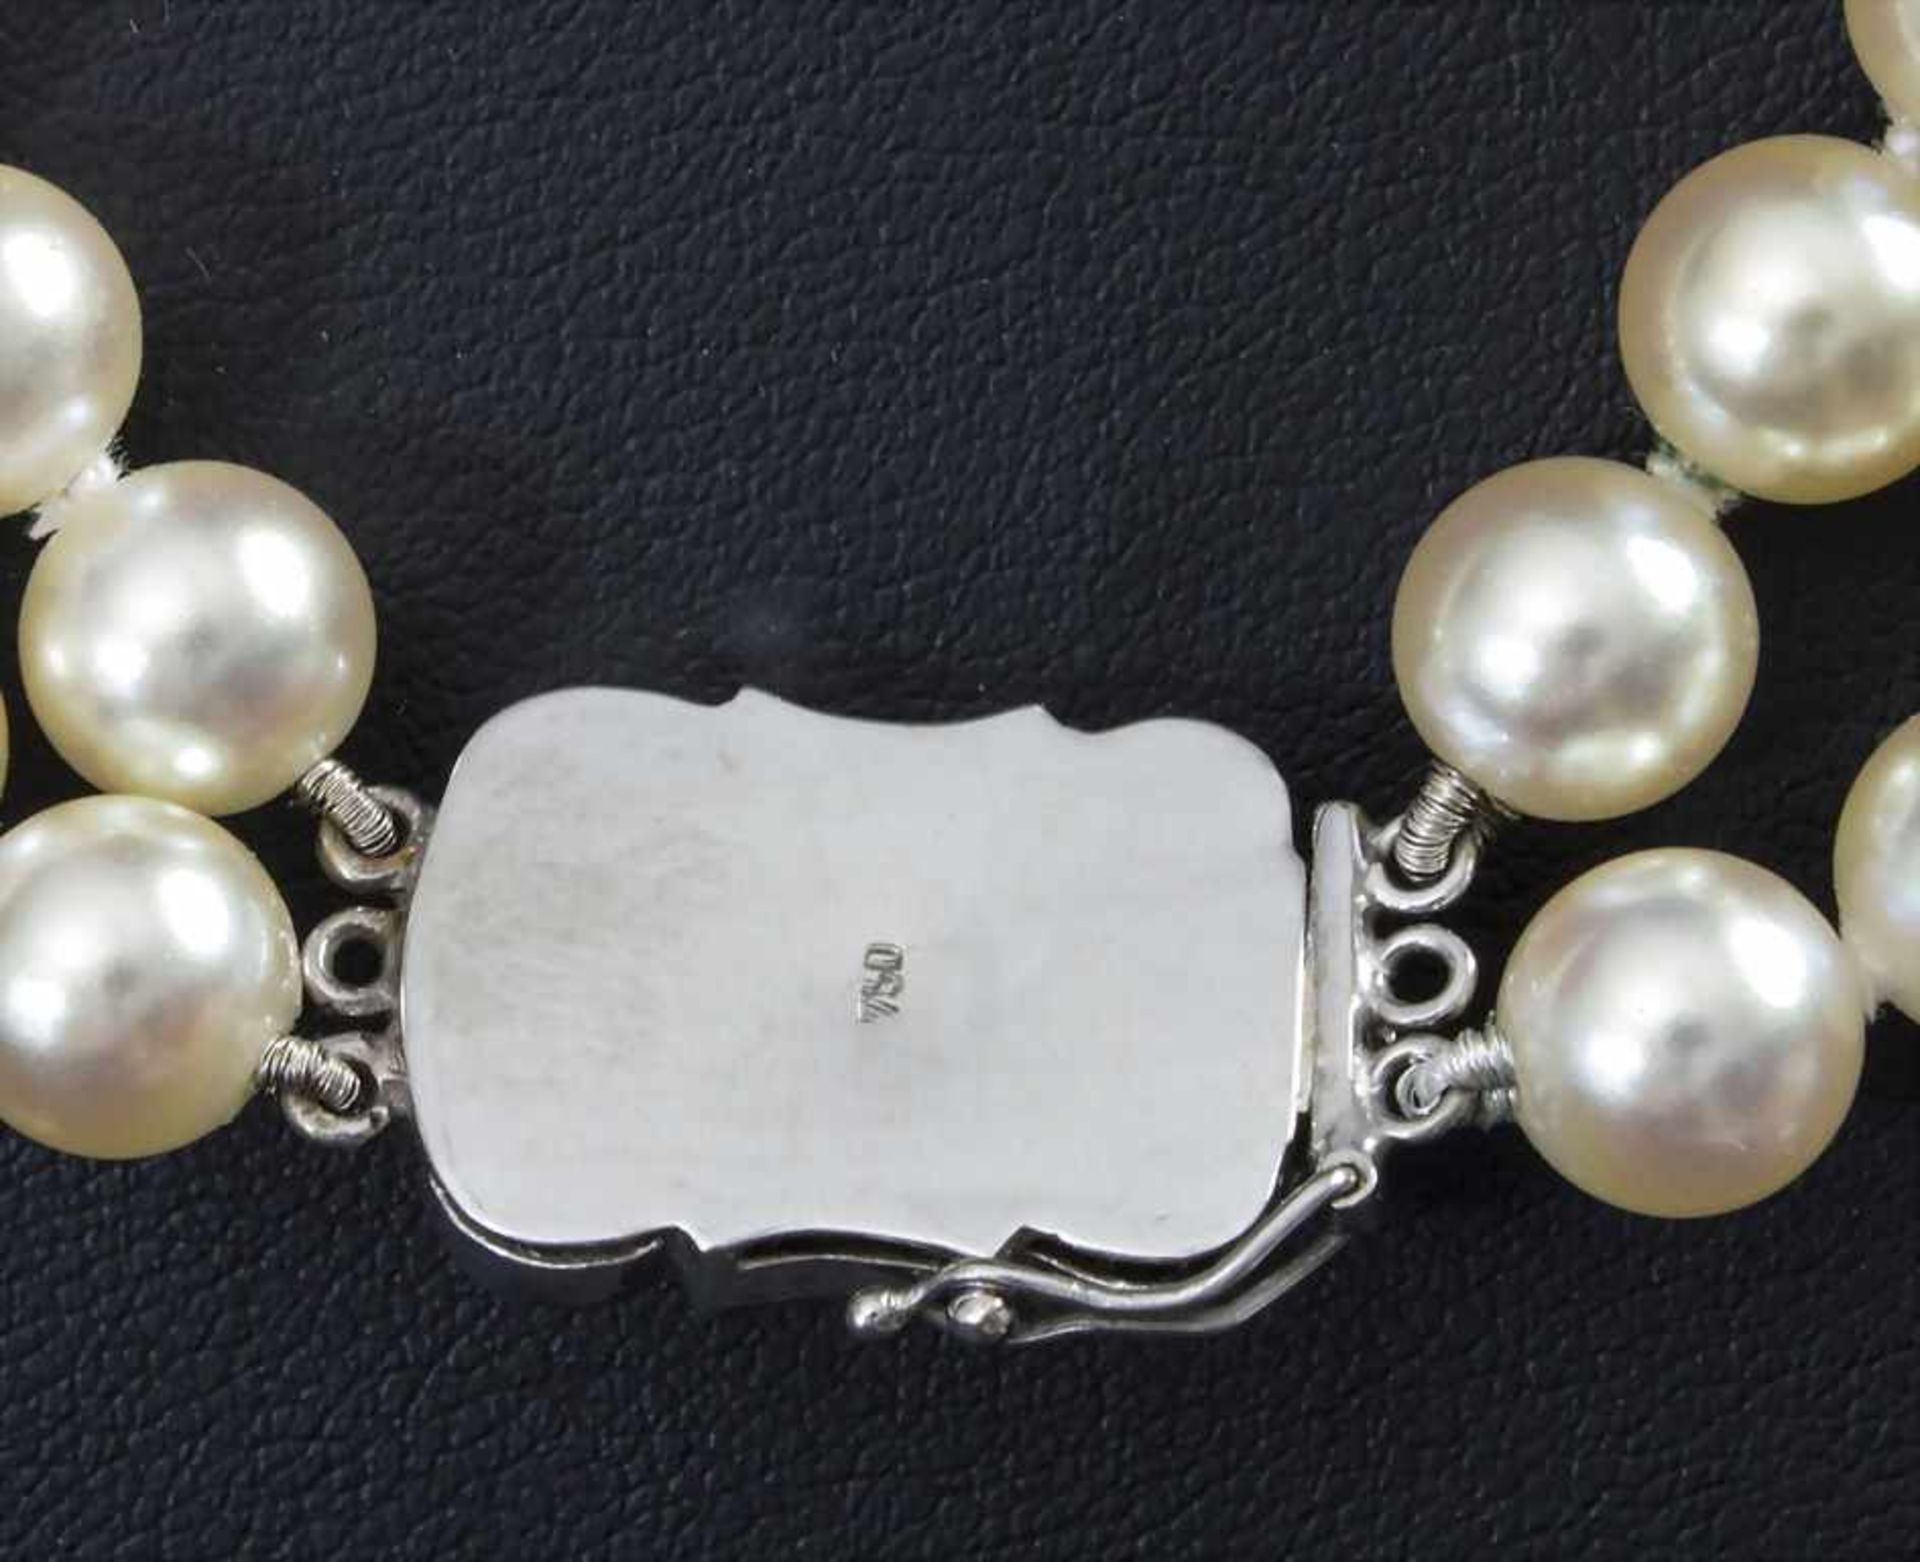 Zweireihige Perlenkette / A pearl necklaces - Image 3 of 4